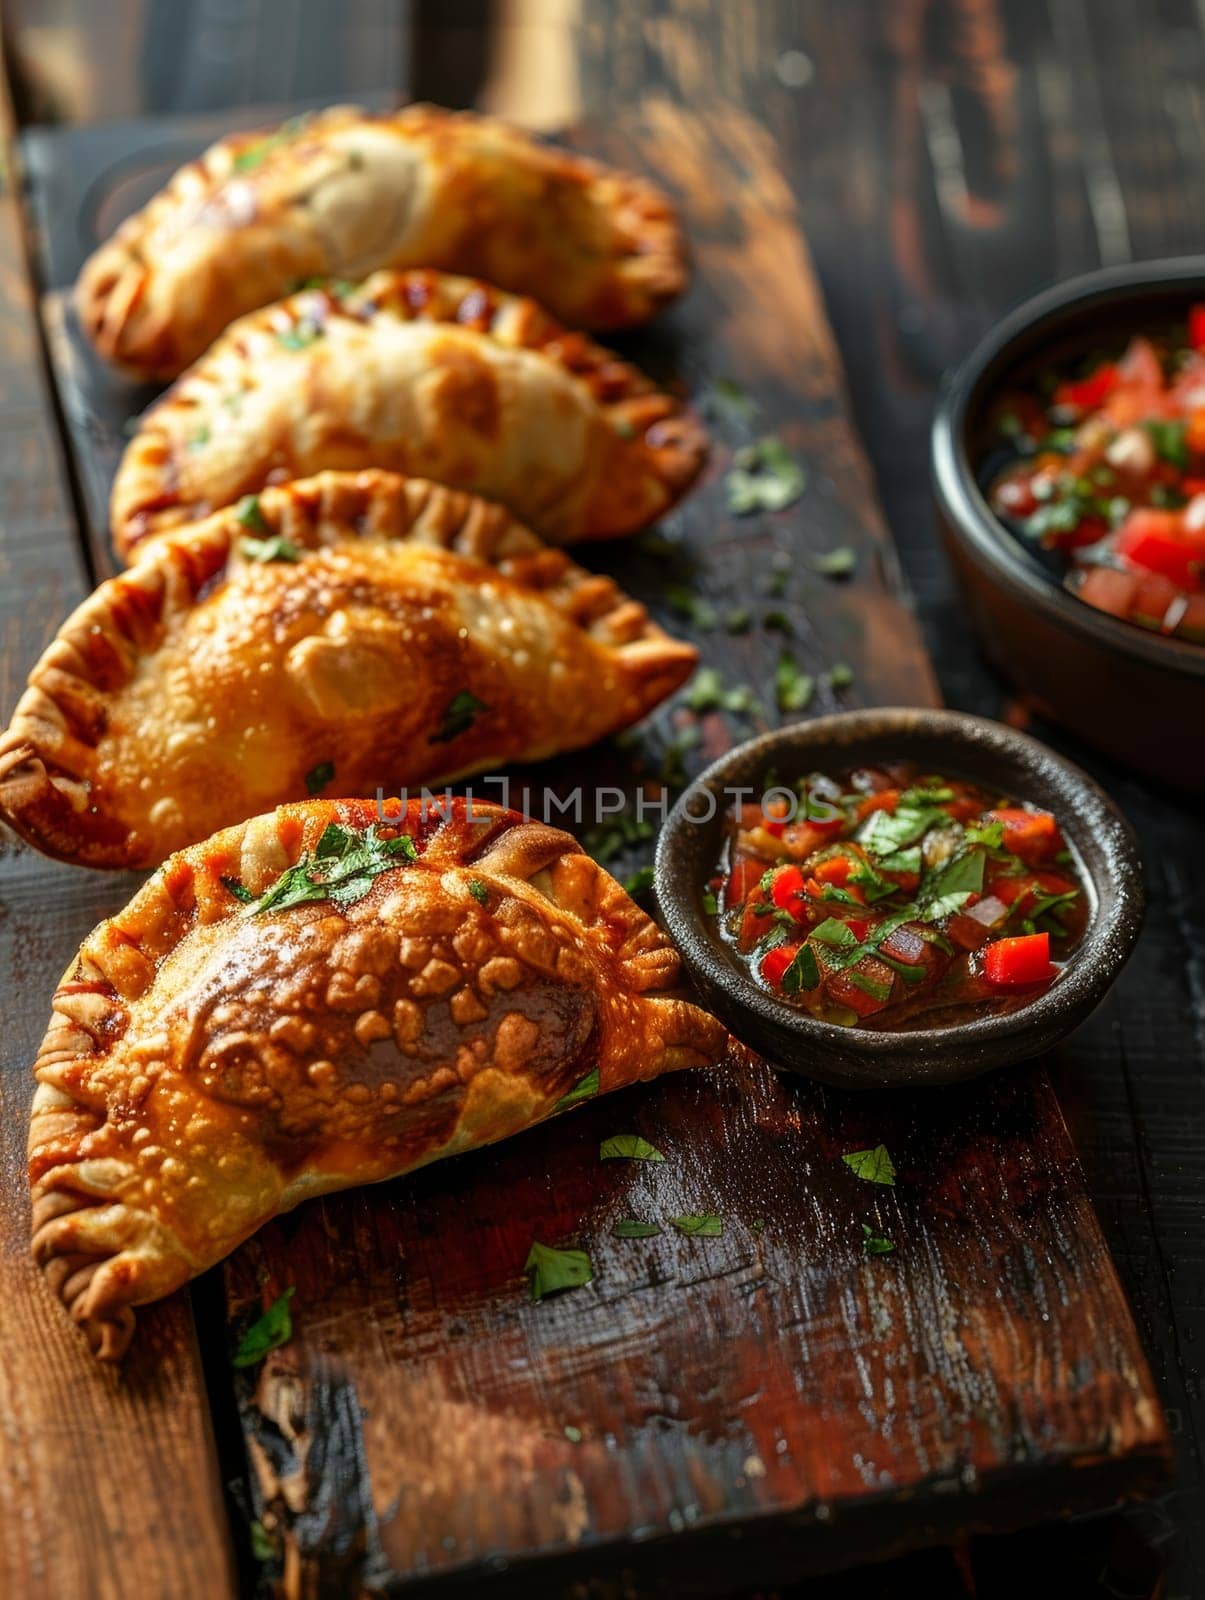 Freshly baked Chilean empanadas, savory pastries filled with a delectable mixture, served alongside a vibrant pebre sauce on a rustic wooden board. This traditional pairing showcases Chilean cuisine